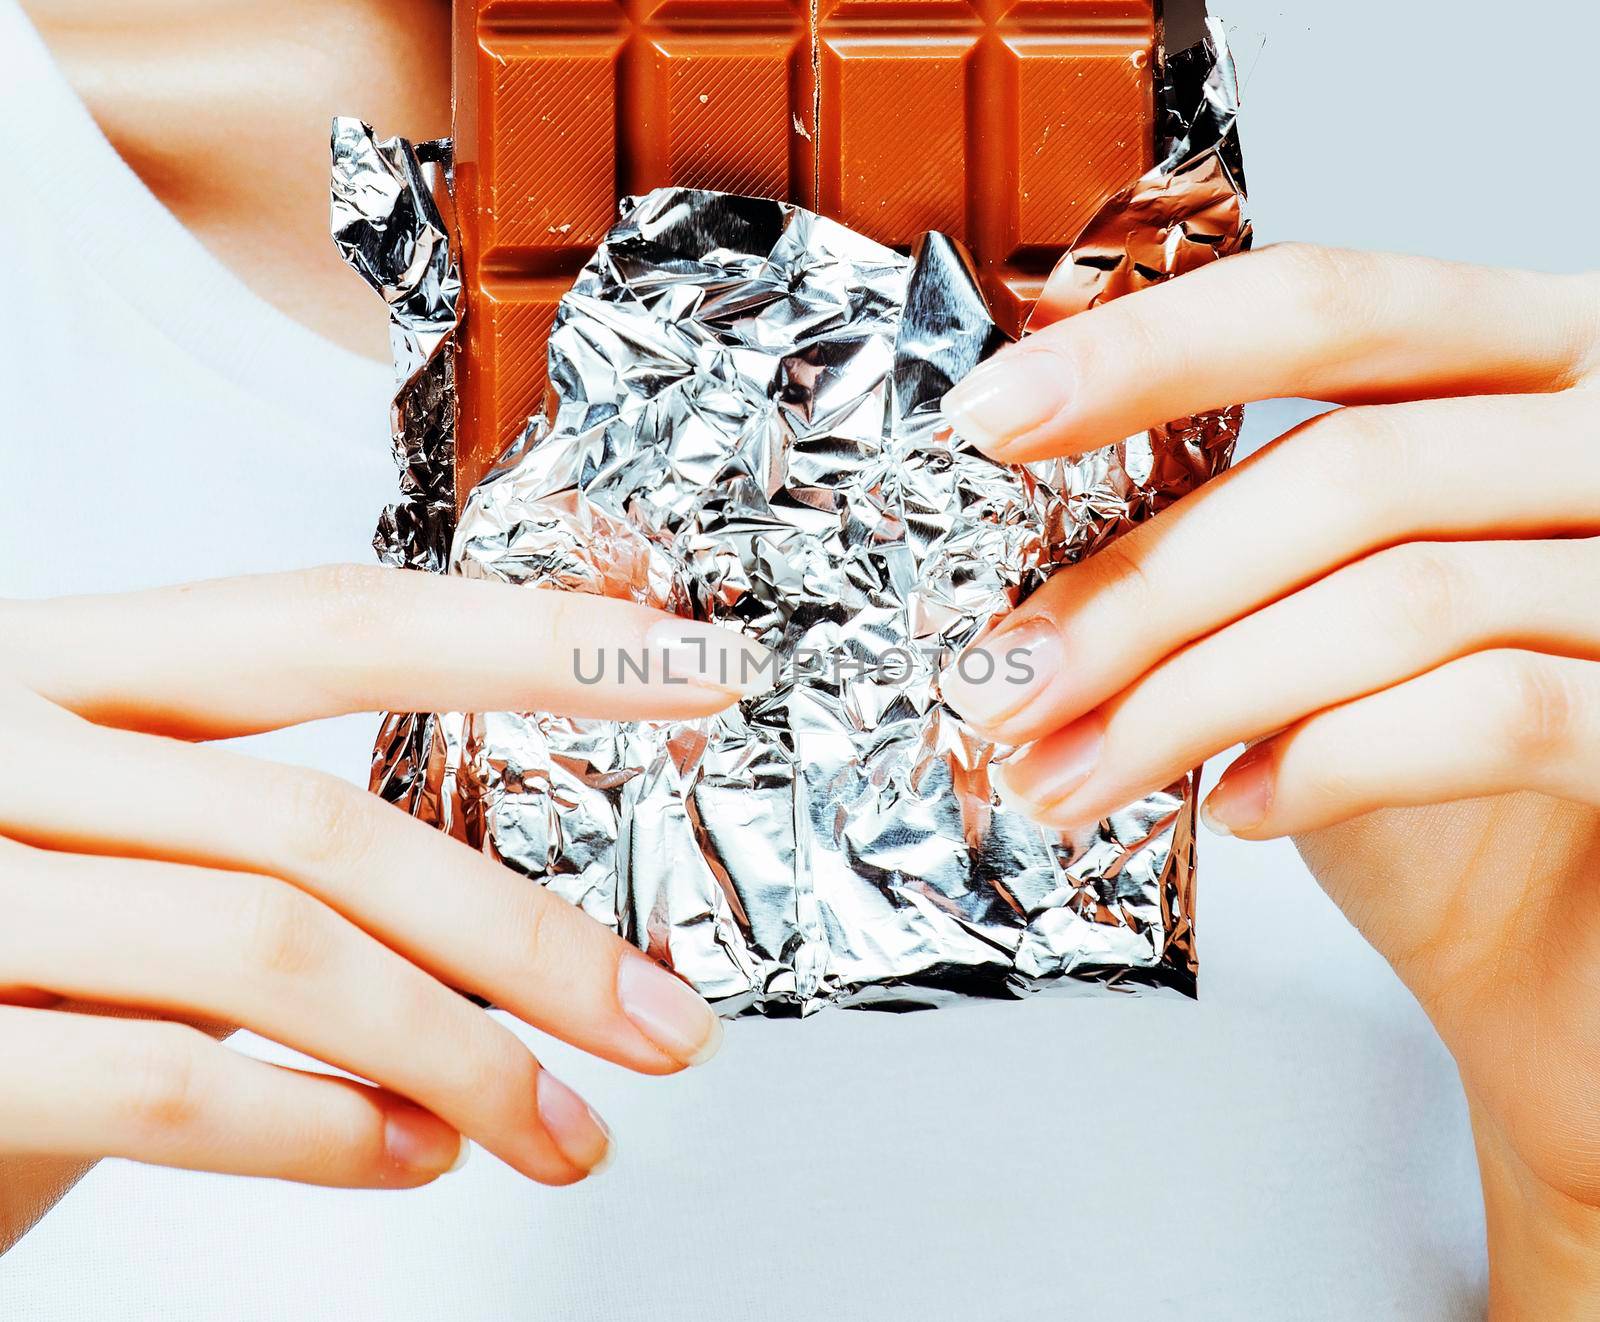 woman eating chocolate, close up hands with manicure french nails holding candy, beautiful fingers, lifestyle concept by JordanJ